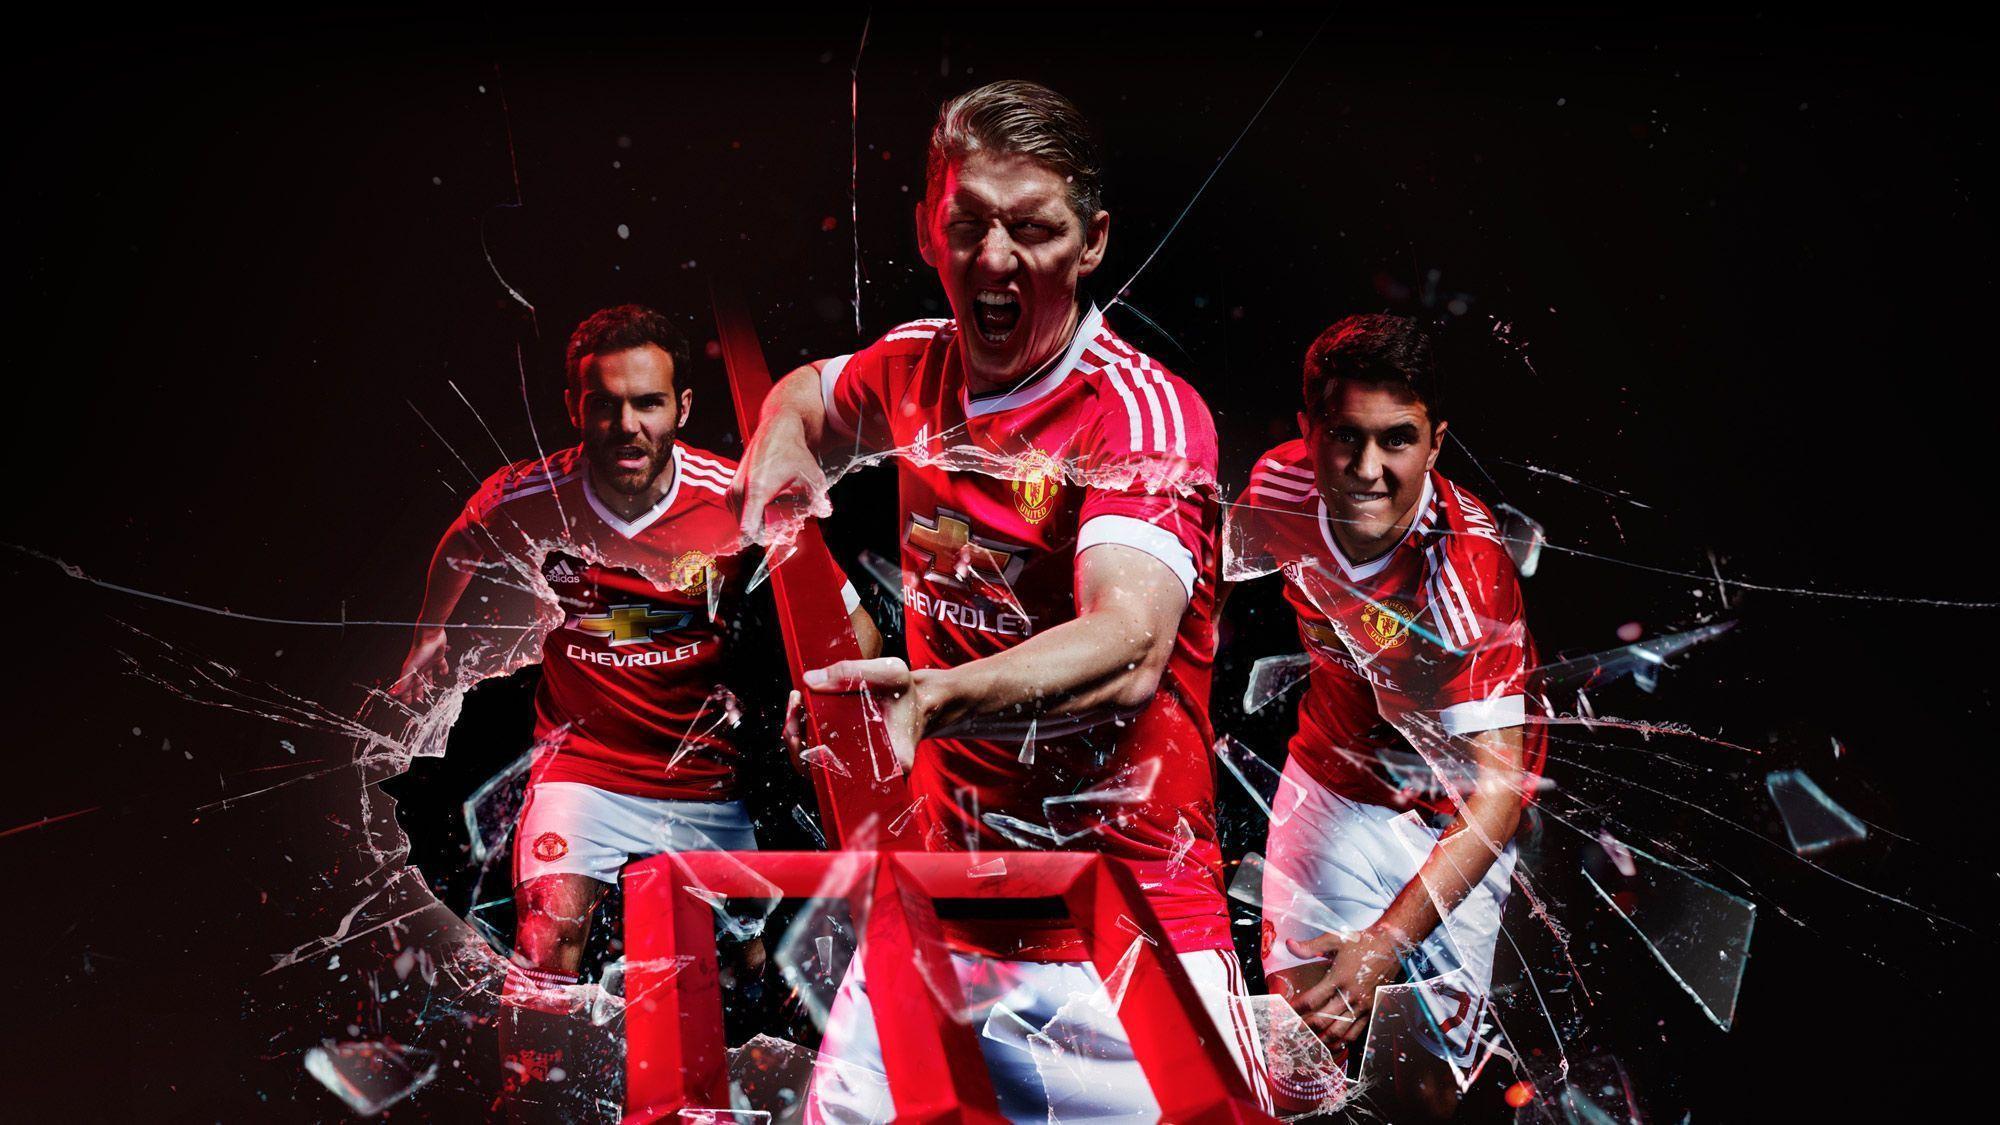 Gallery of Manchester United players wearing new adidas away kit